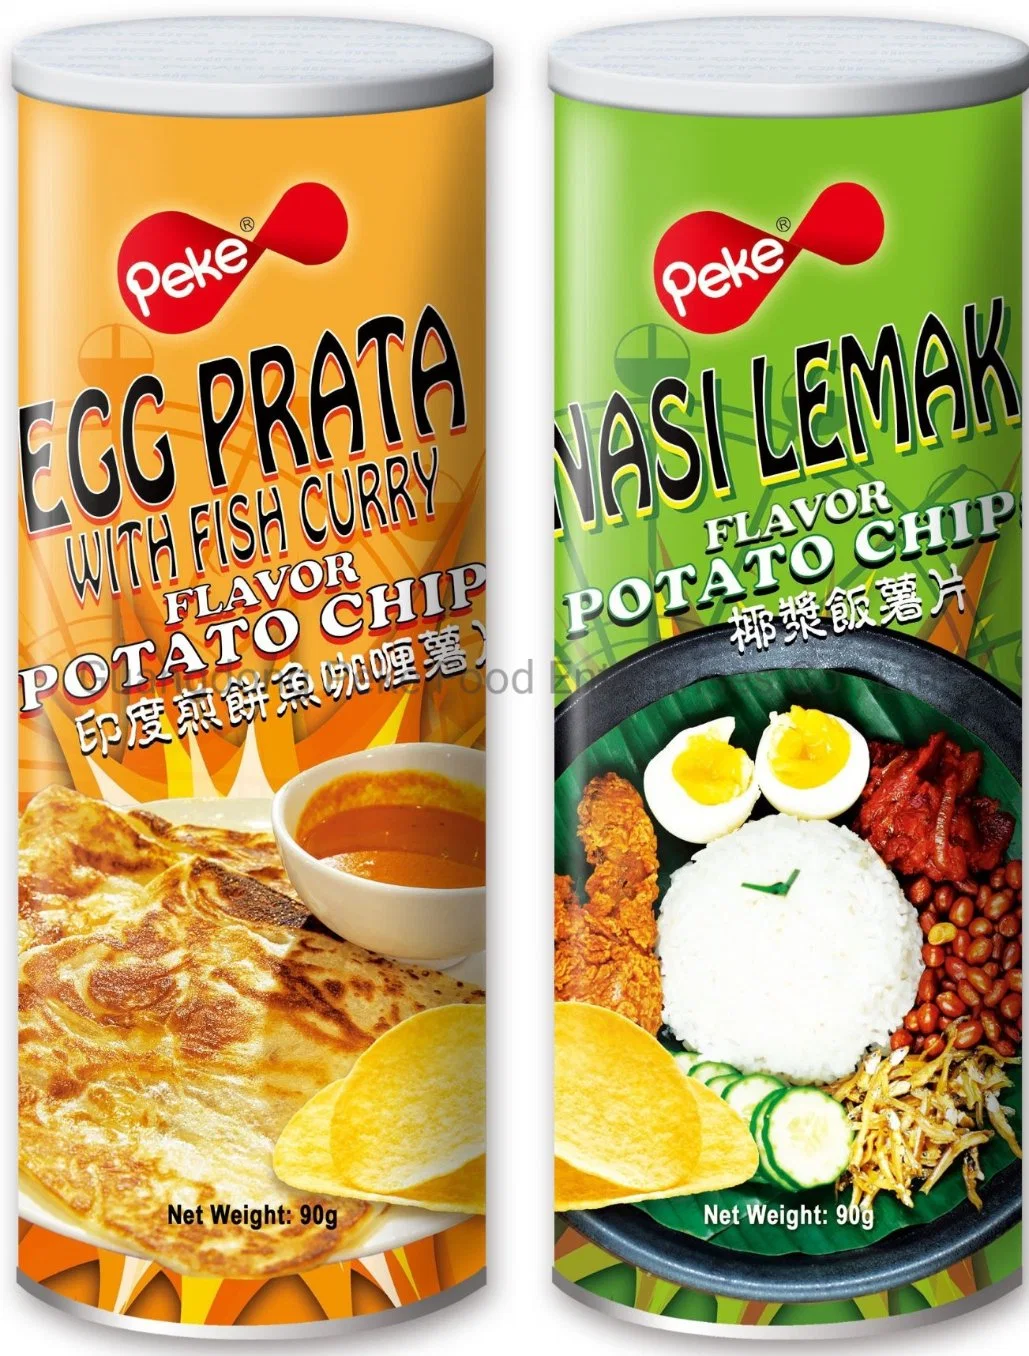 Egg Prata with Fish Curry Flavor Potato Chips- Asian Flavors Snacks